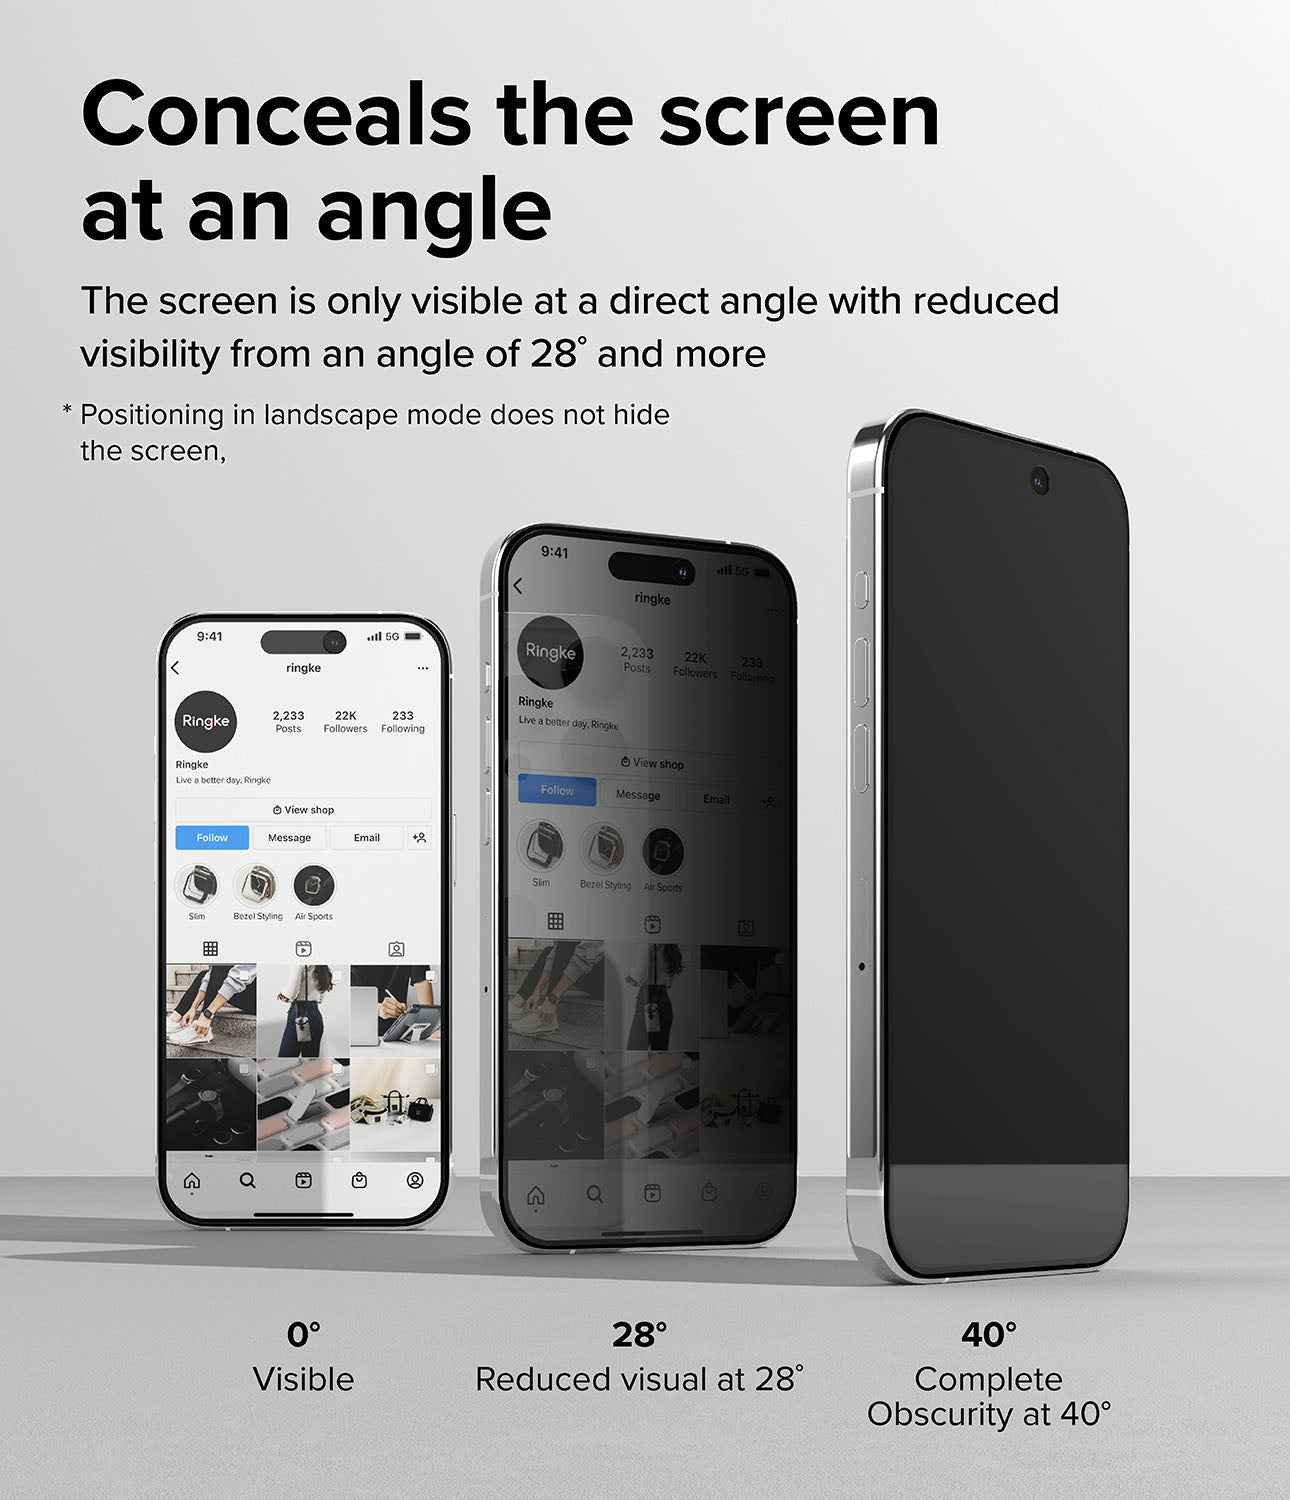 iPhone 15 Pro Max Screen Protector | Privacy Glass - Conceals the screen at an angle. The screen is only visible at a direct angle with reduced visibility from an angle of 28 degrees and more.